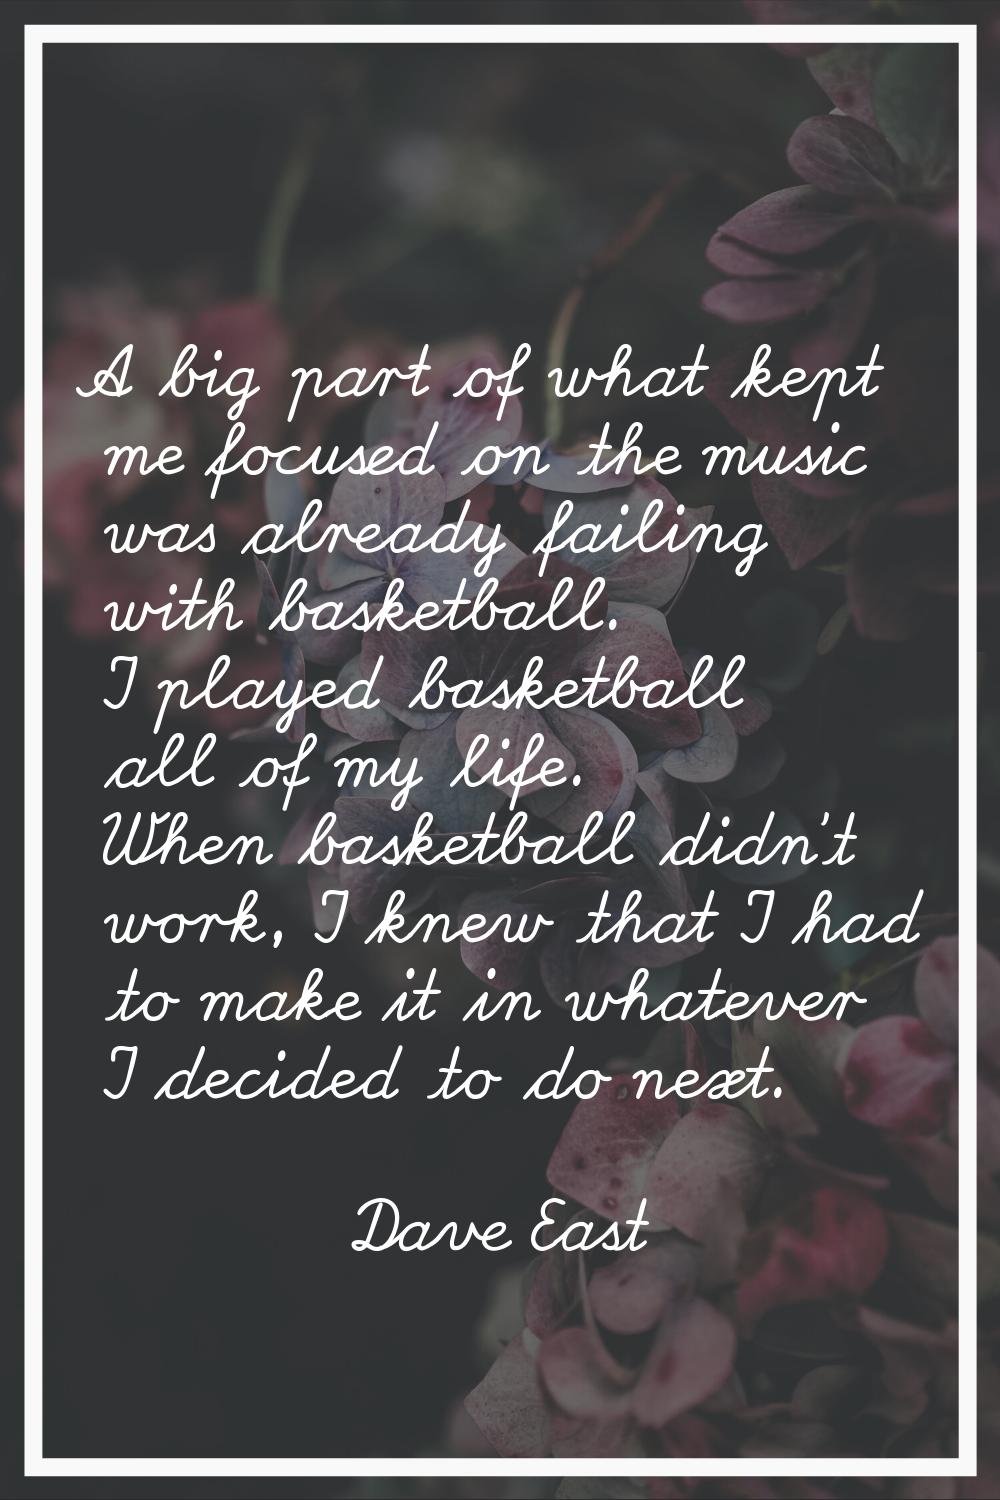 A big part of what kept me focused on the music was already failing with basketball. I played baske